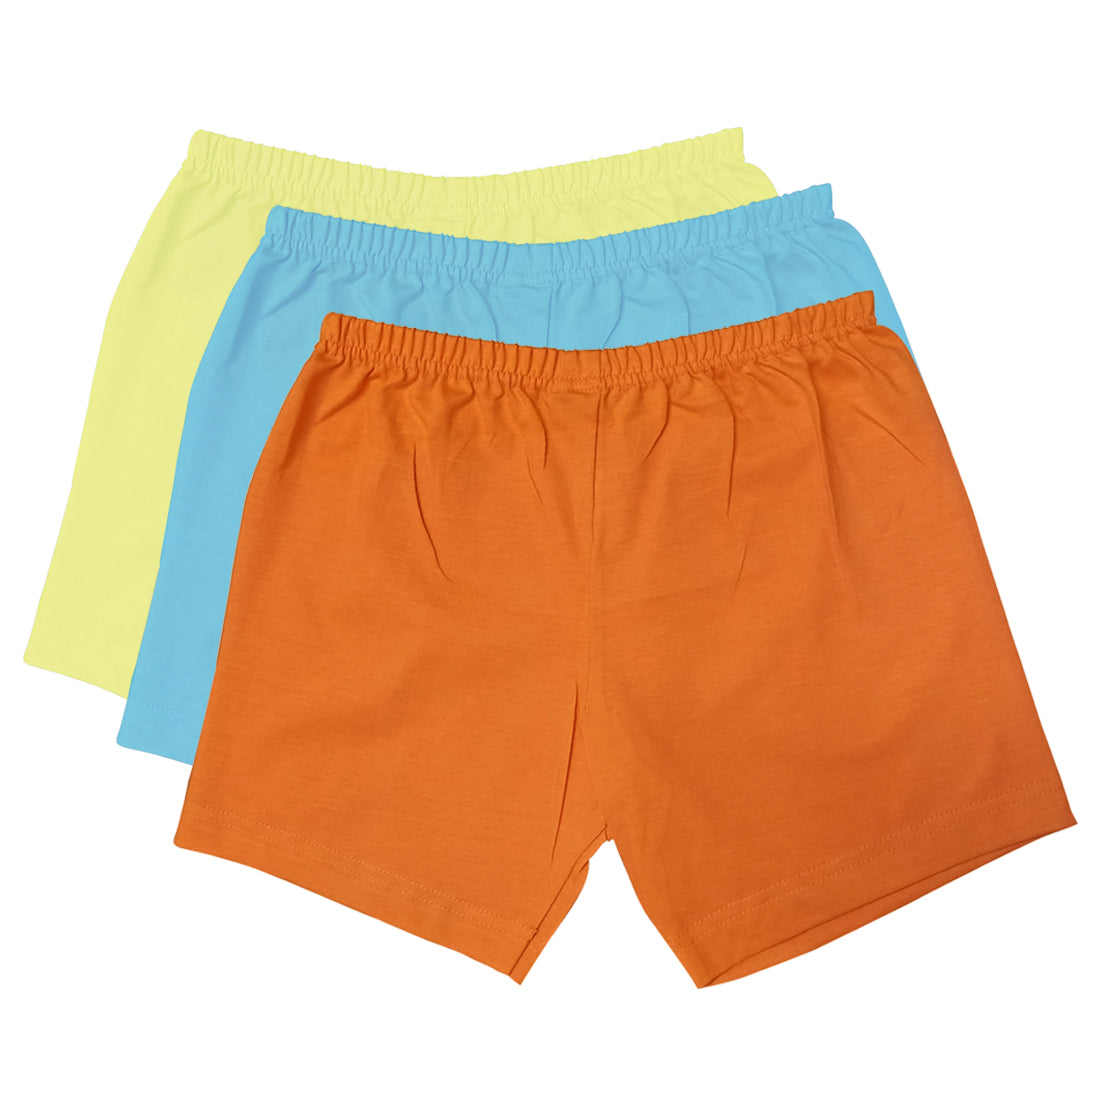 Crazy Shorts For kids